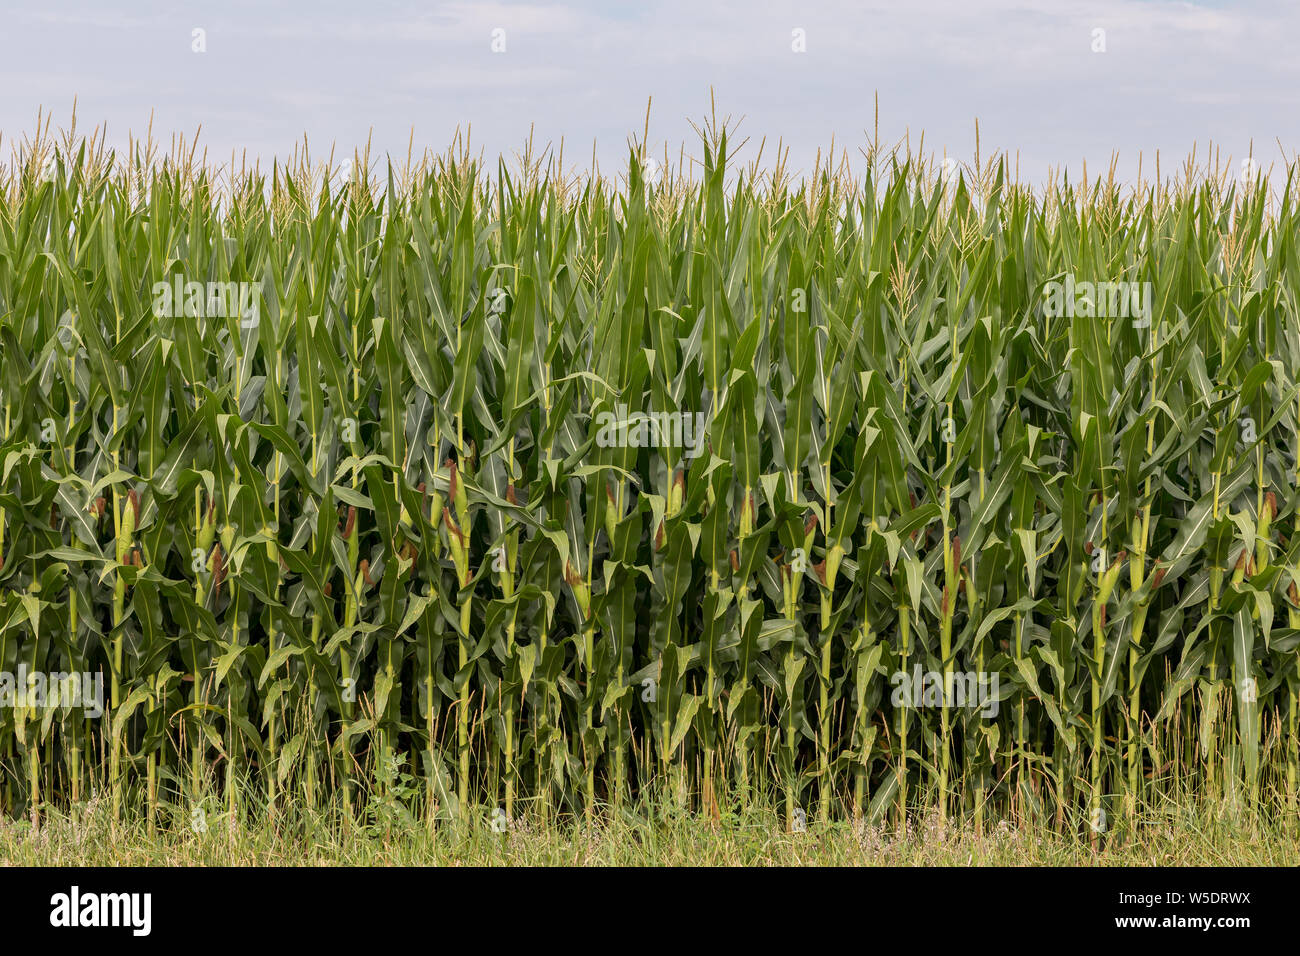 Corn field with tassels, silk, and ears of corn on healthy corn stalks in mid summer Stock Photo